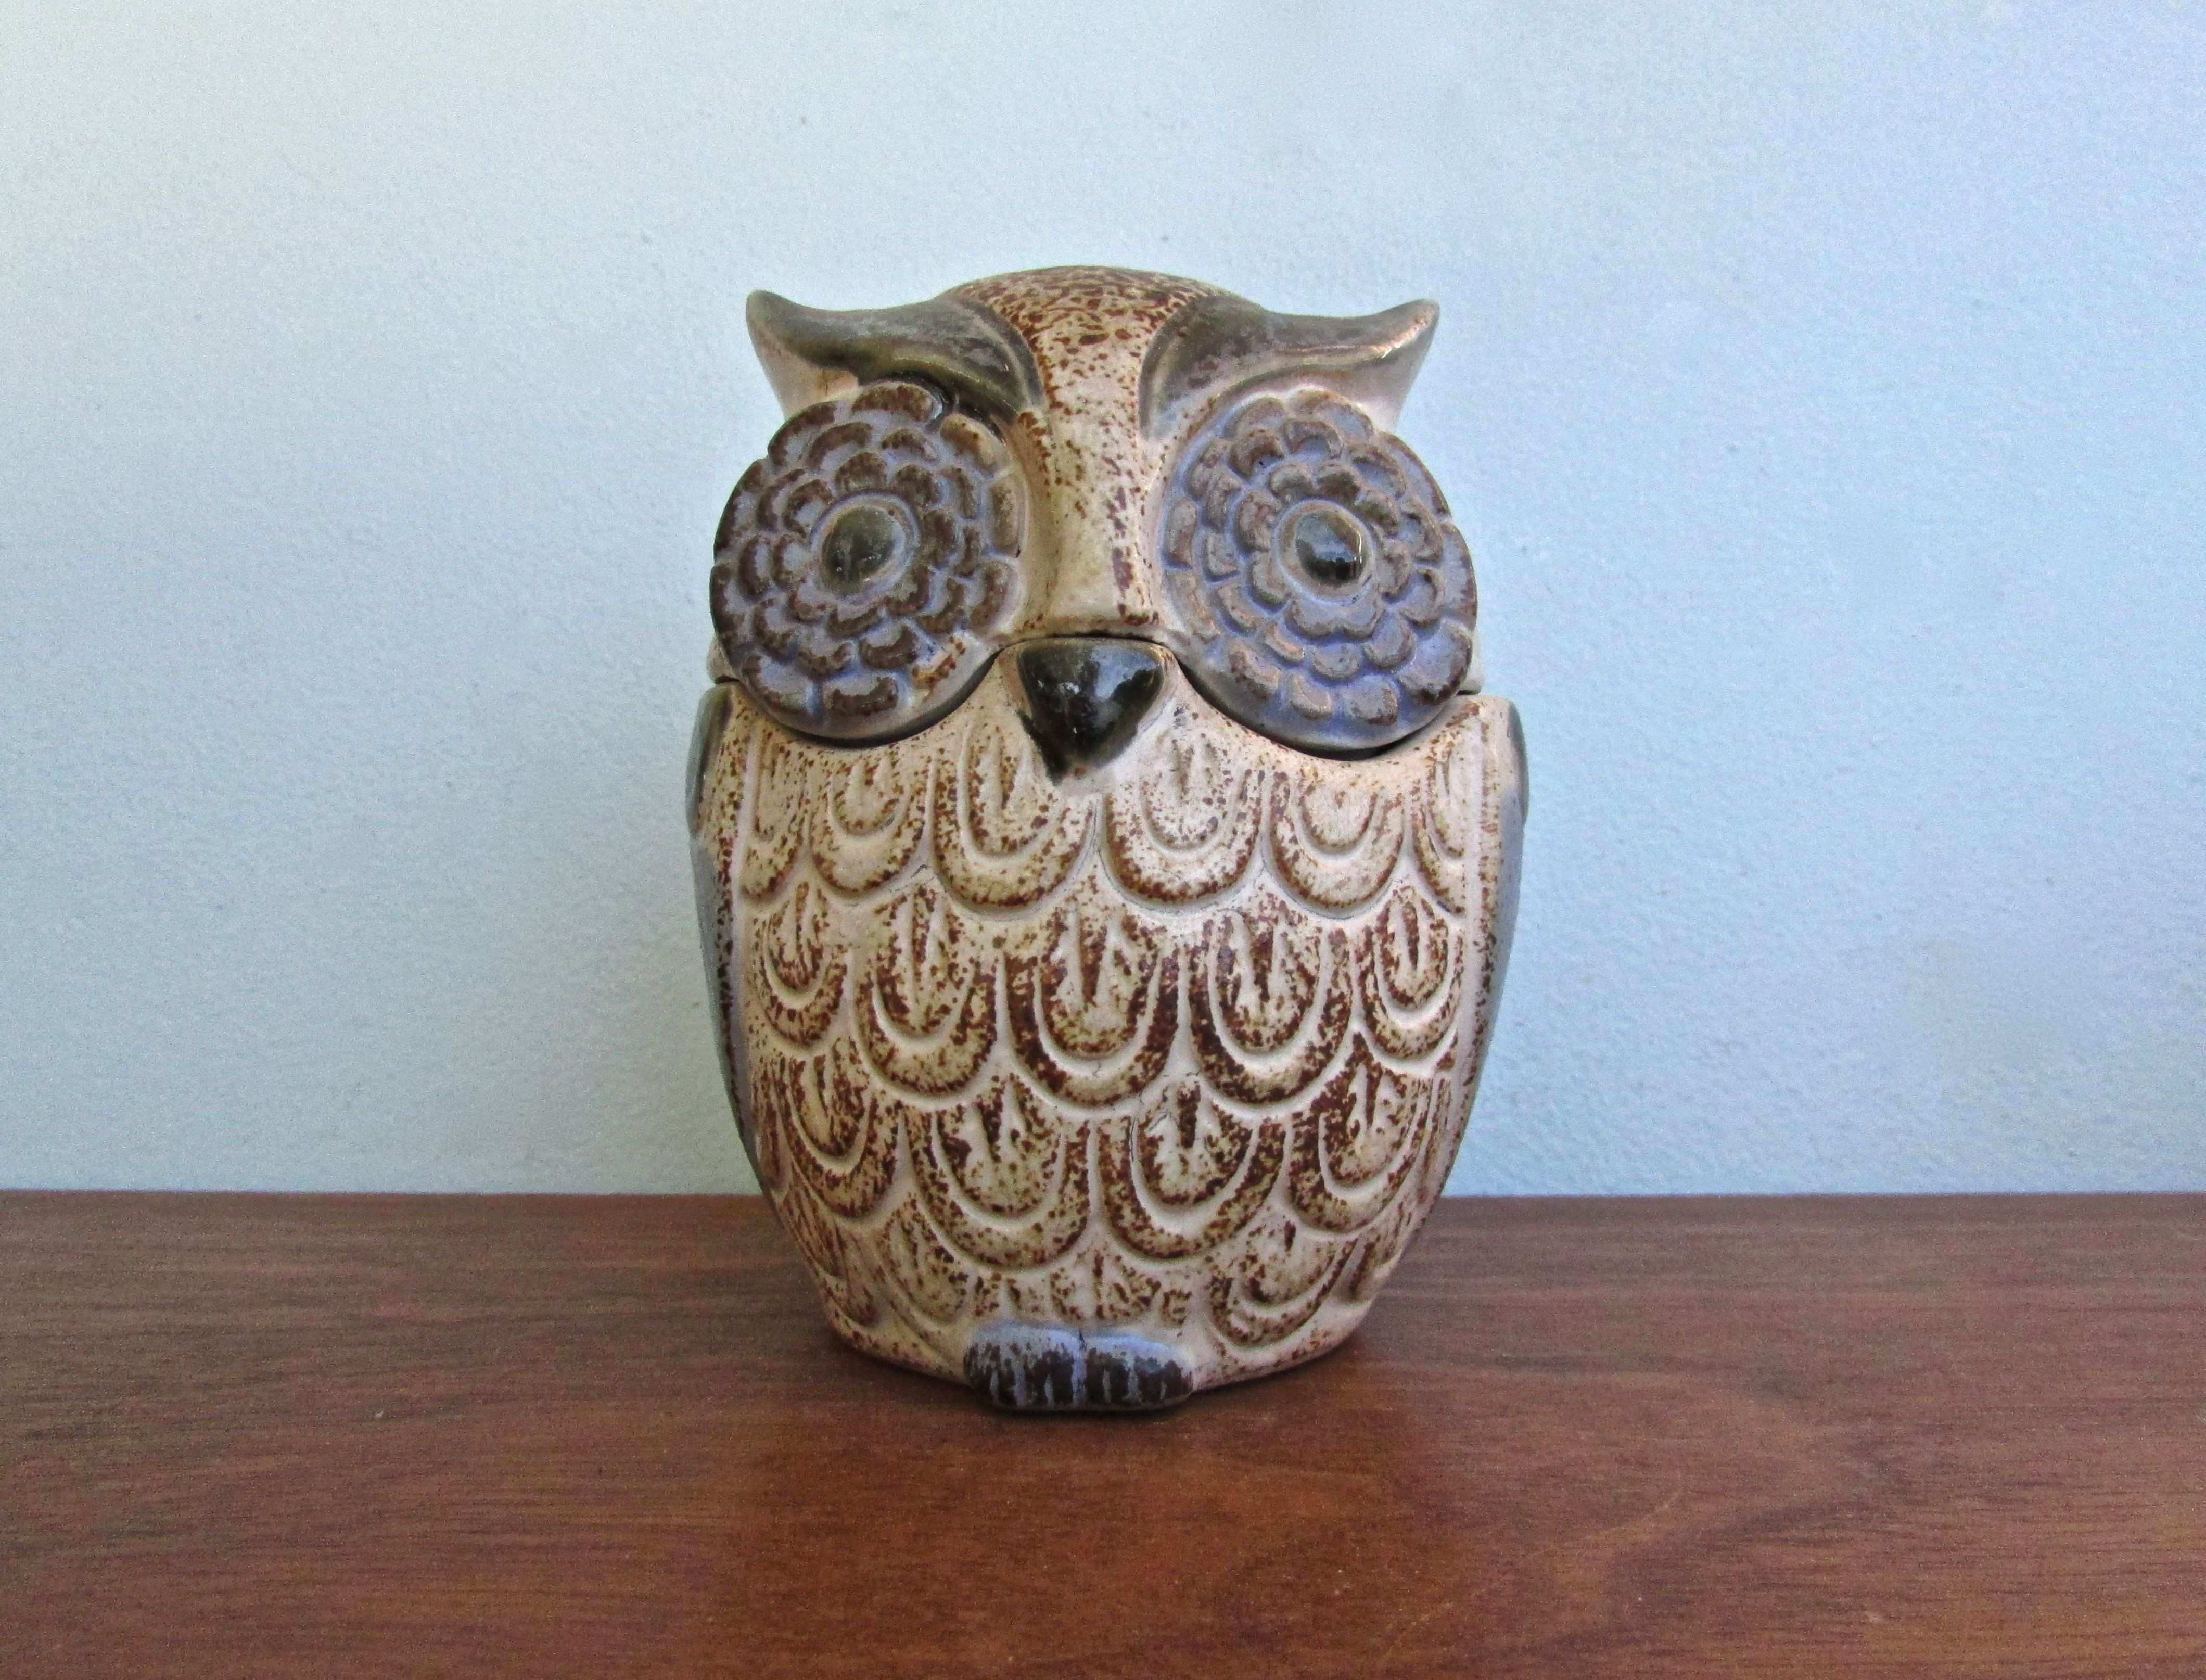 23 Recommended Otagiri Japan Bud Vase 2024 free download otagiri japan bud vase of stoneware owl box by counterpoint japan imported into san francisco intended for stoneware owl box by counterpoint japan imported into san francisco in the 1970s ar